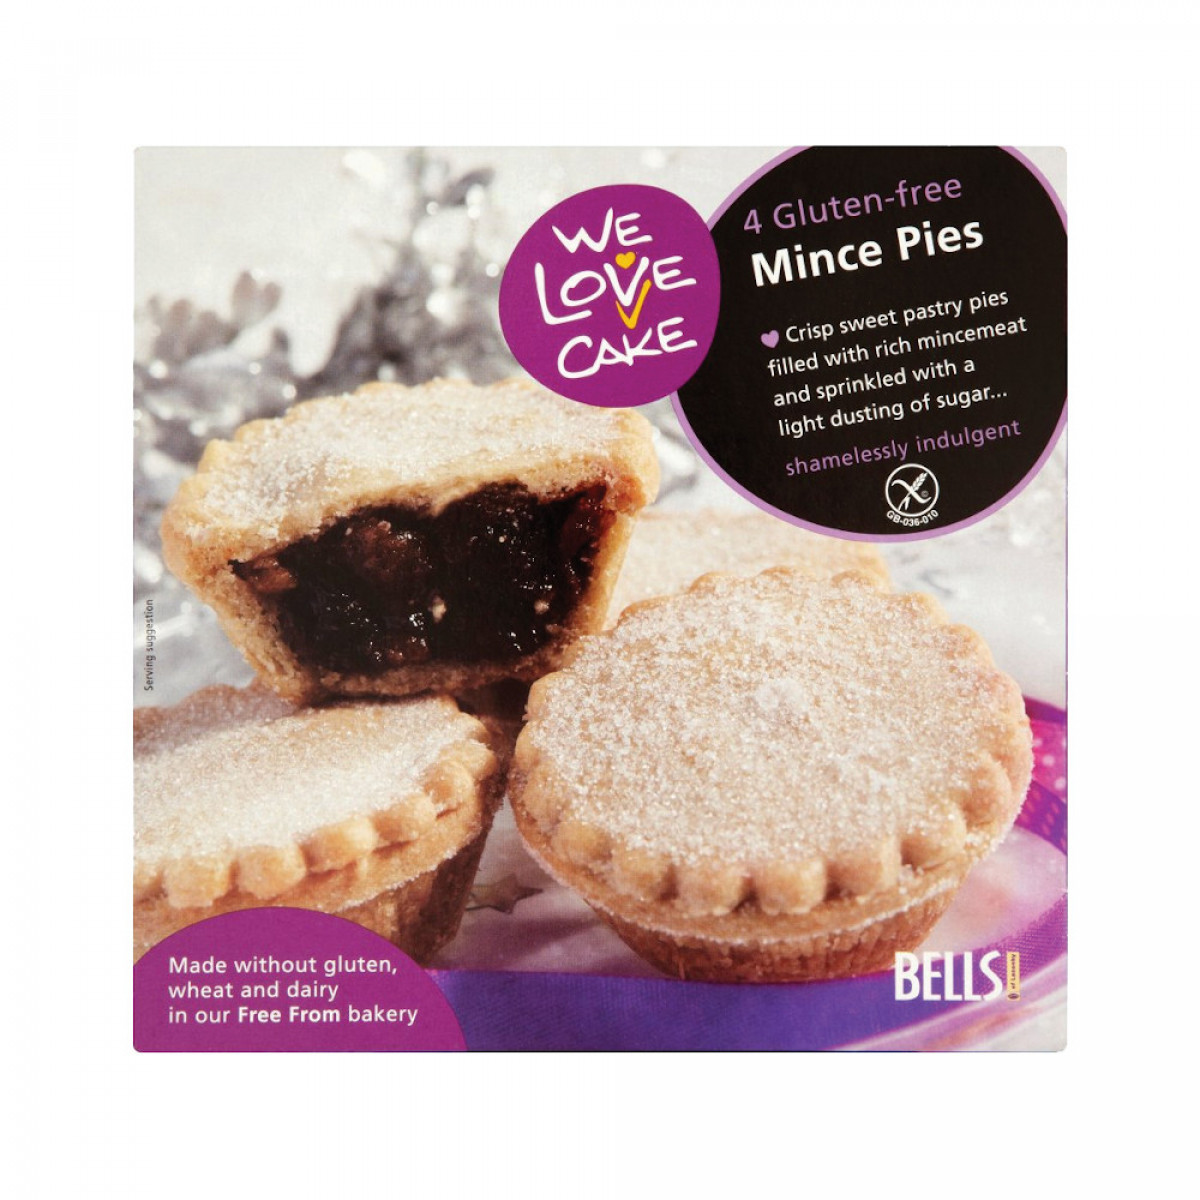 Product picture for Mince Pies (4) Gluten Free